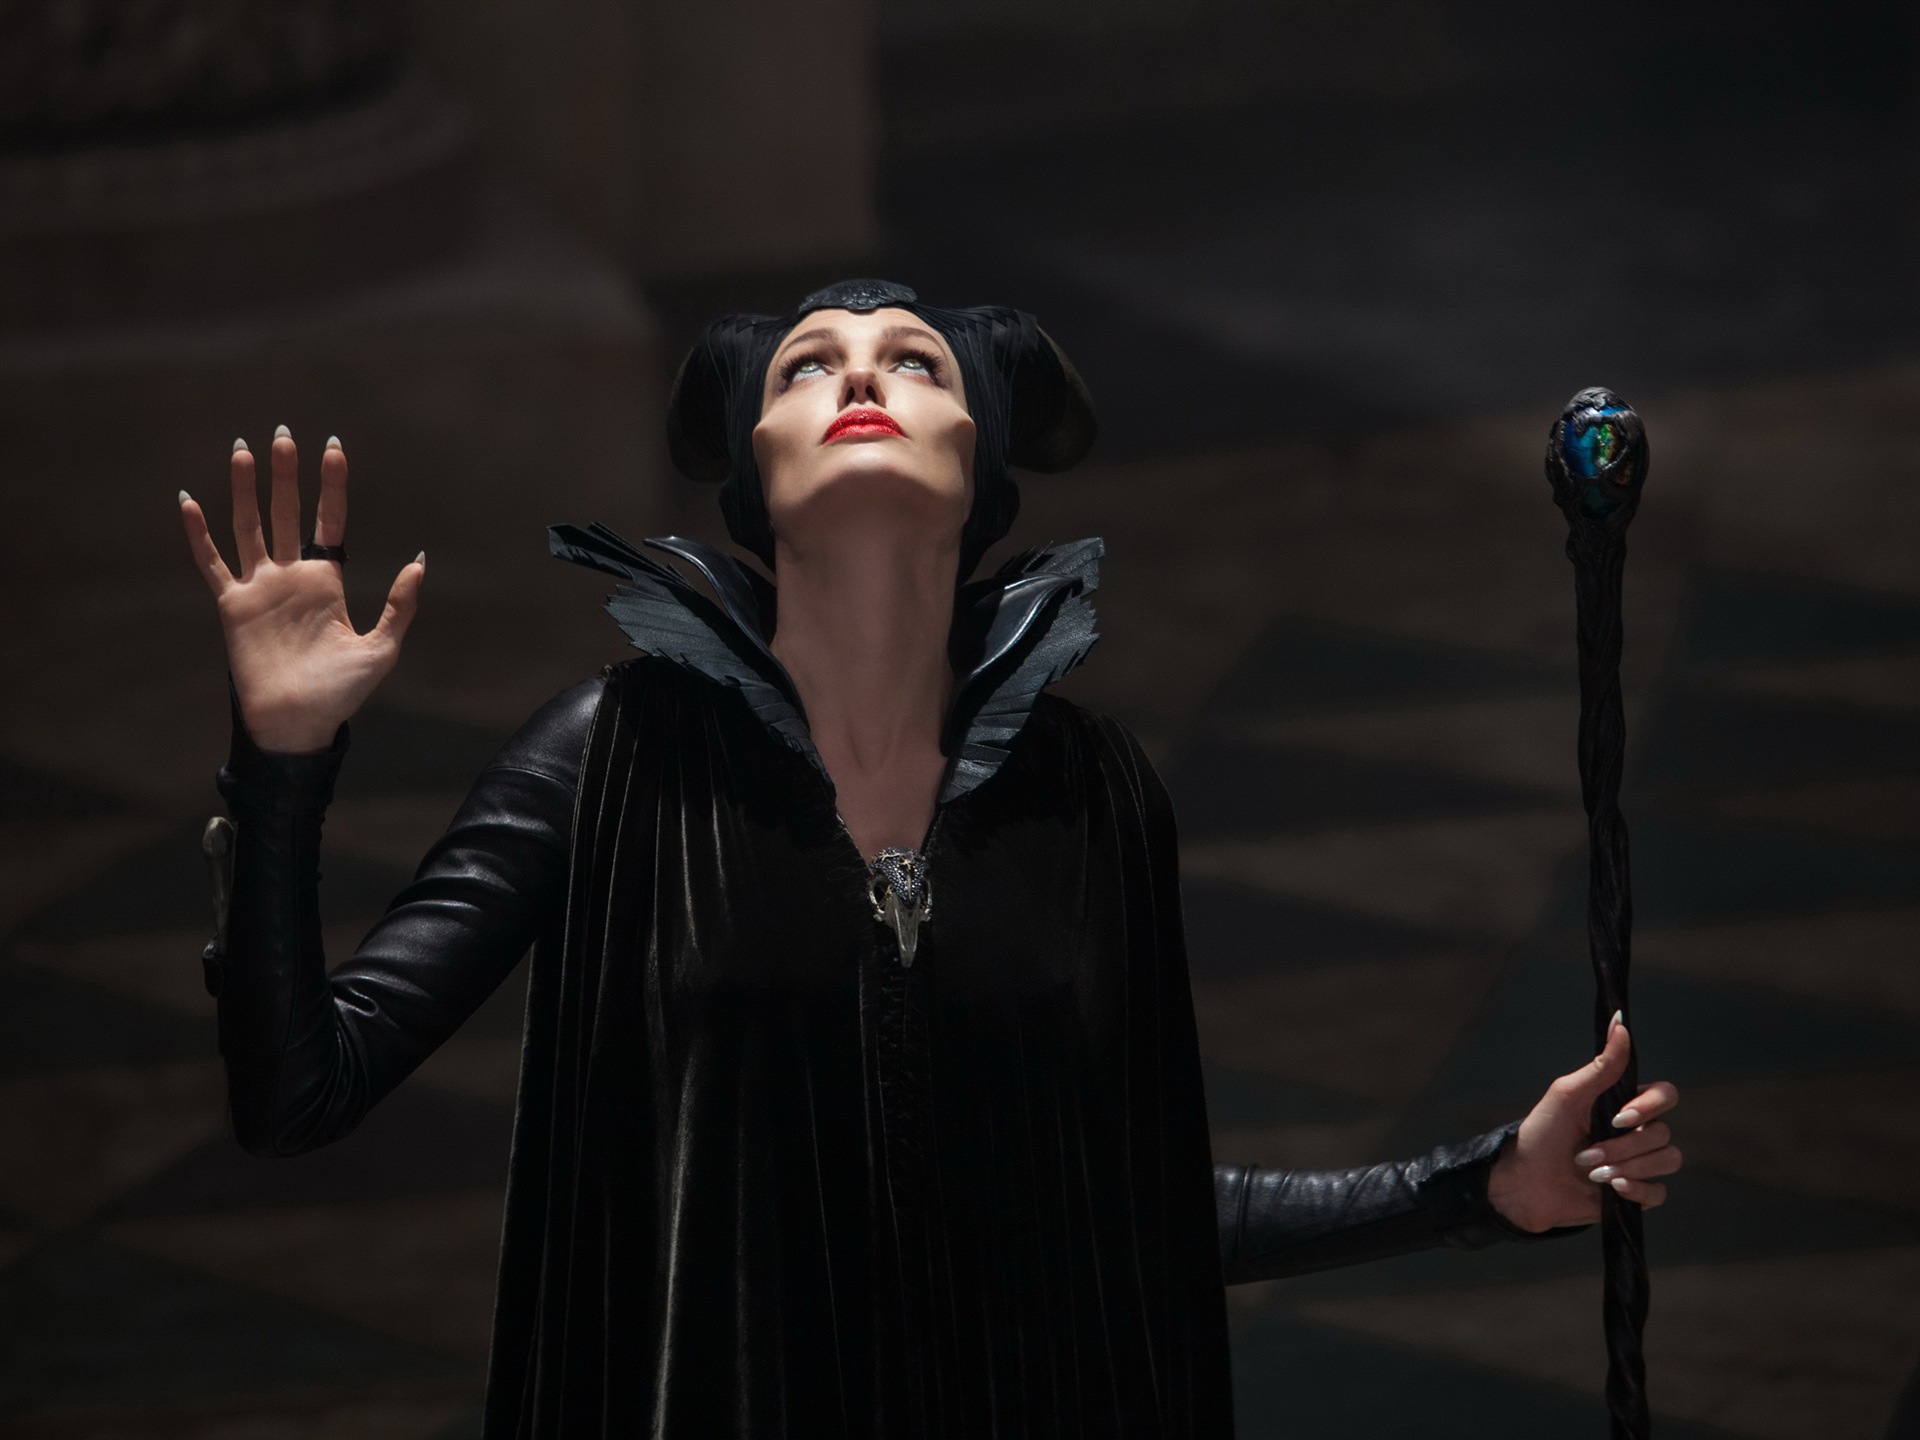 Maleficent 2014 HD movie wallpapers #4 - 1920x1440